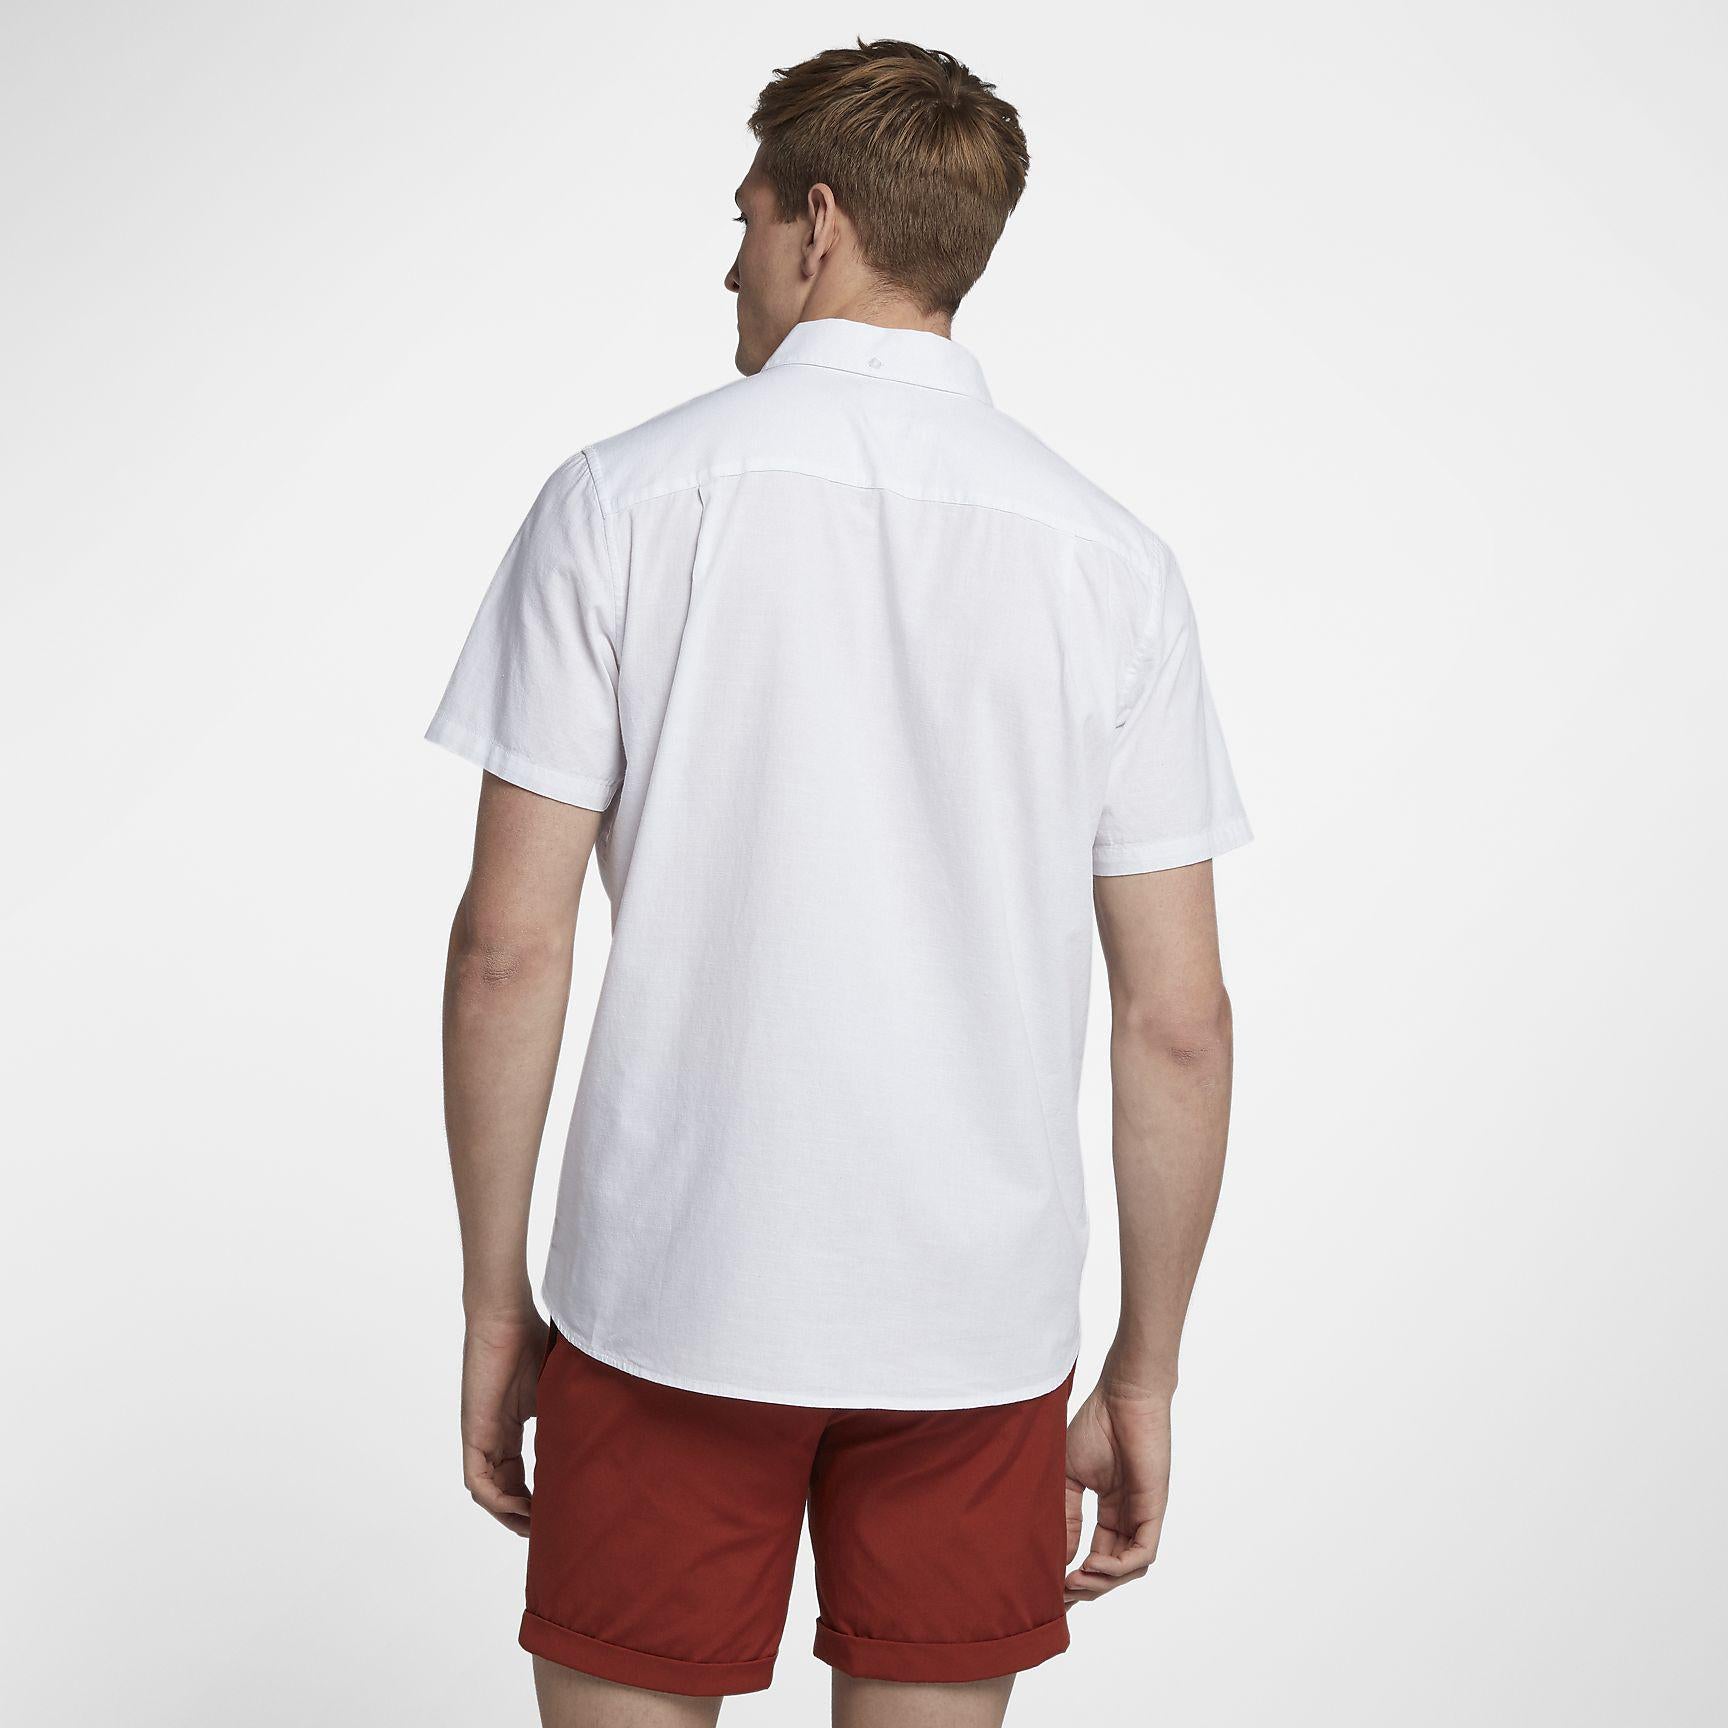 Men's Top Hurley One And Only 2.0